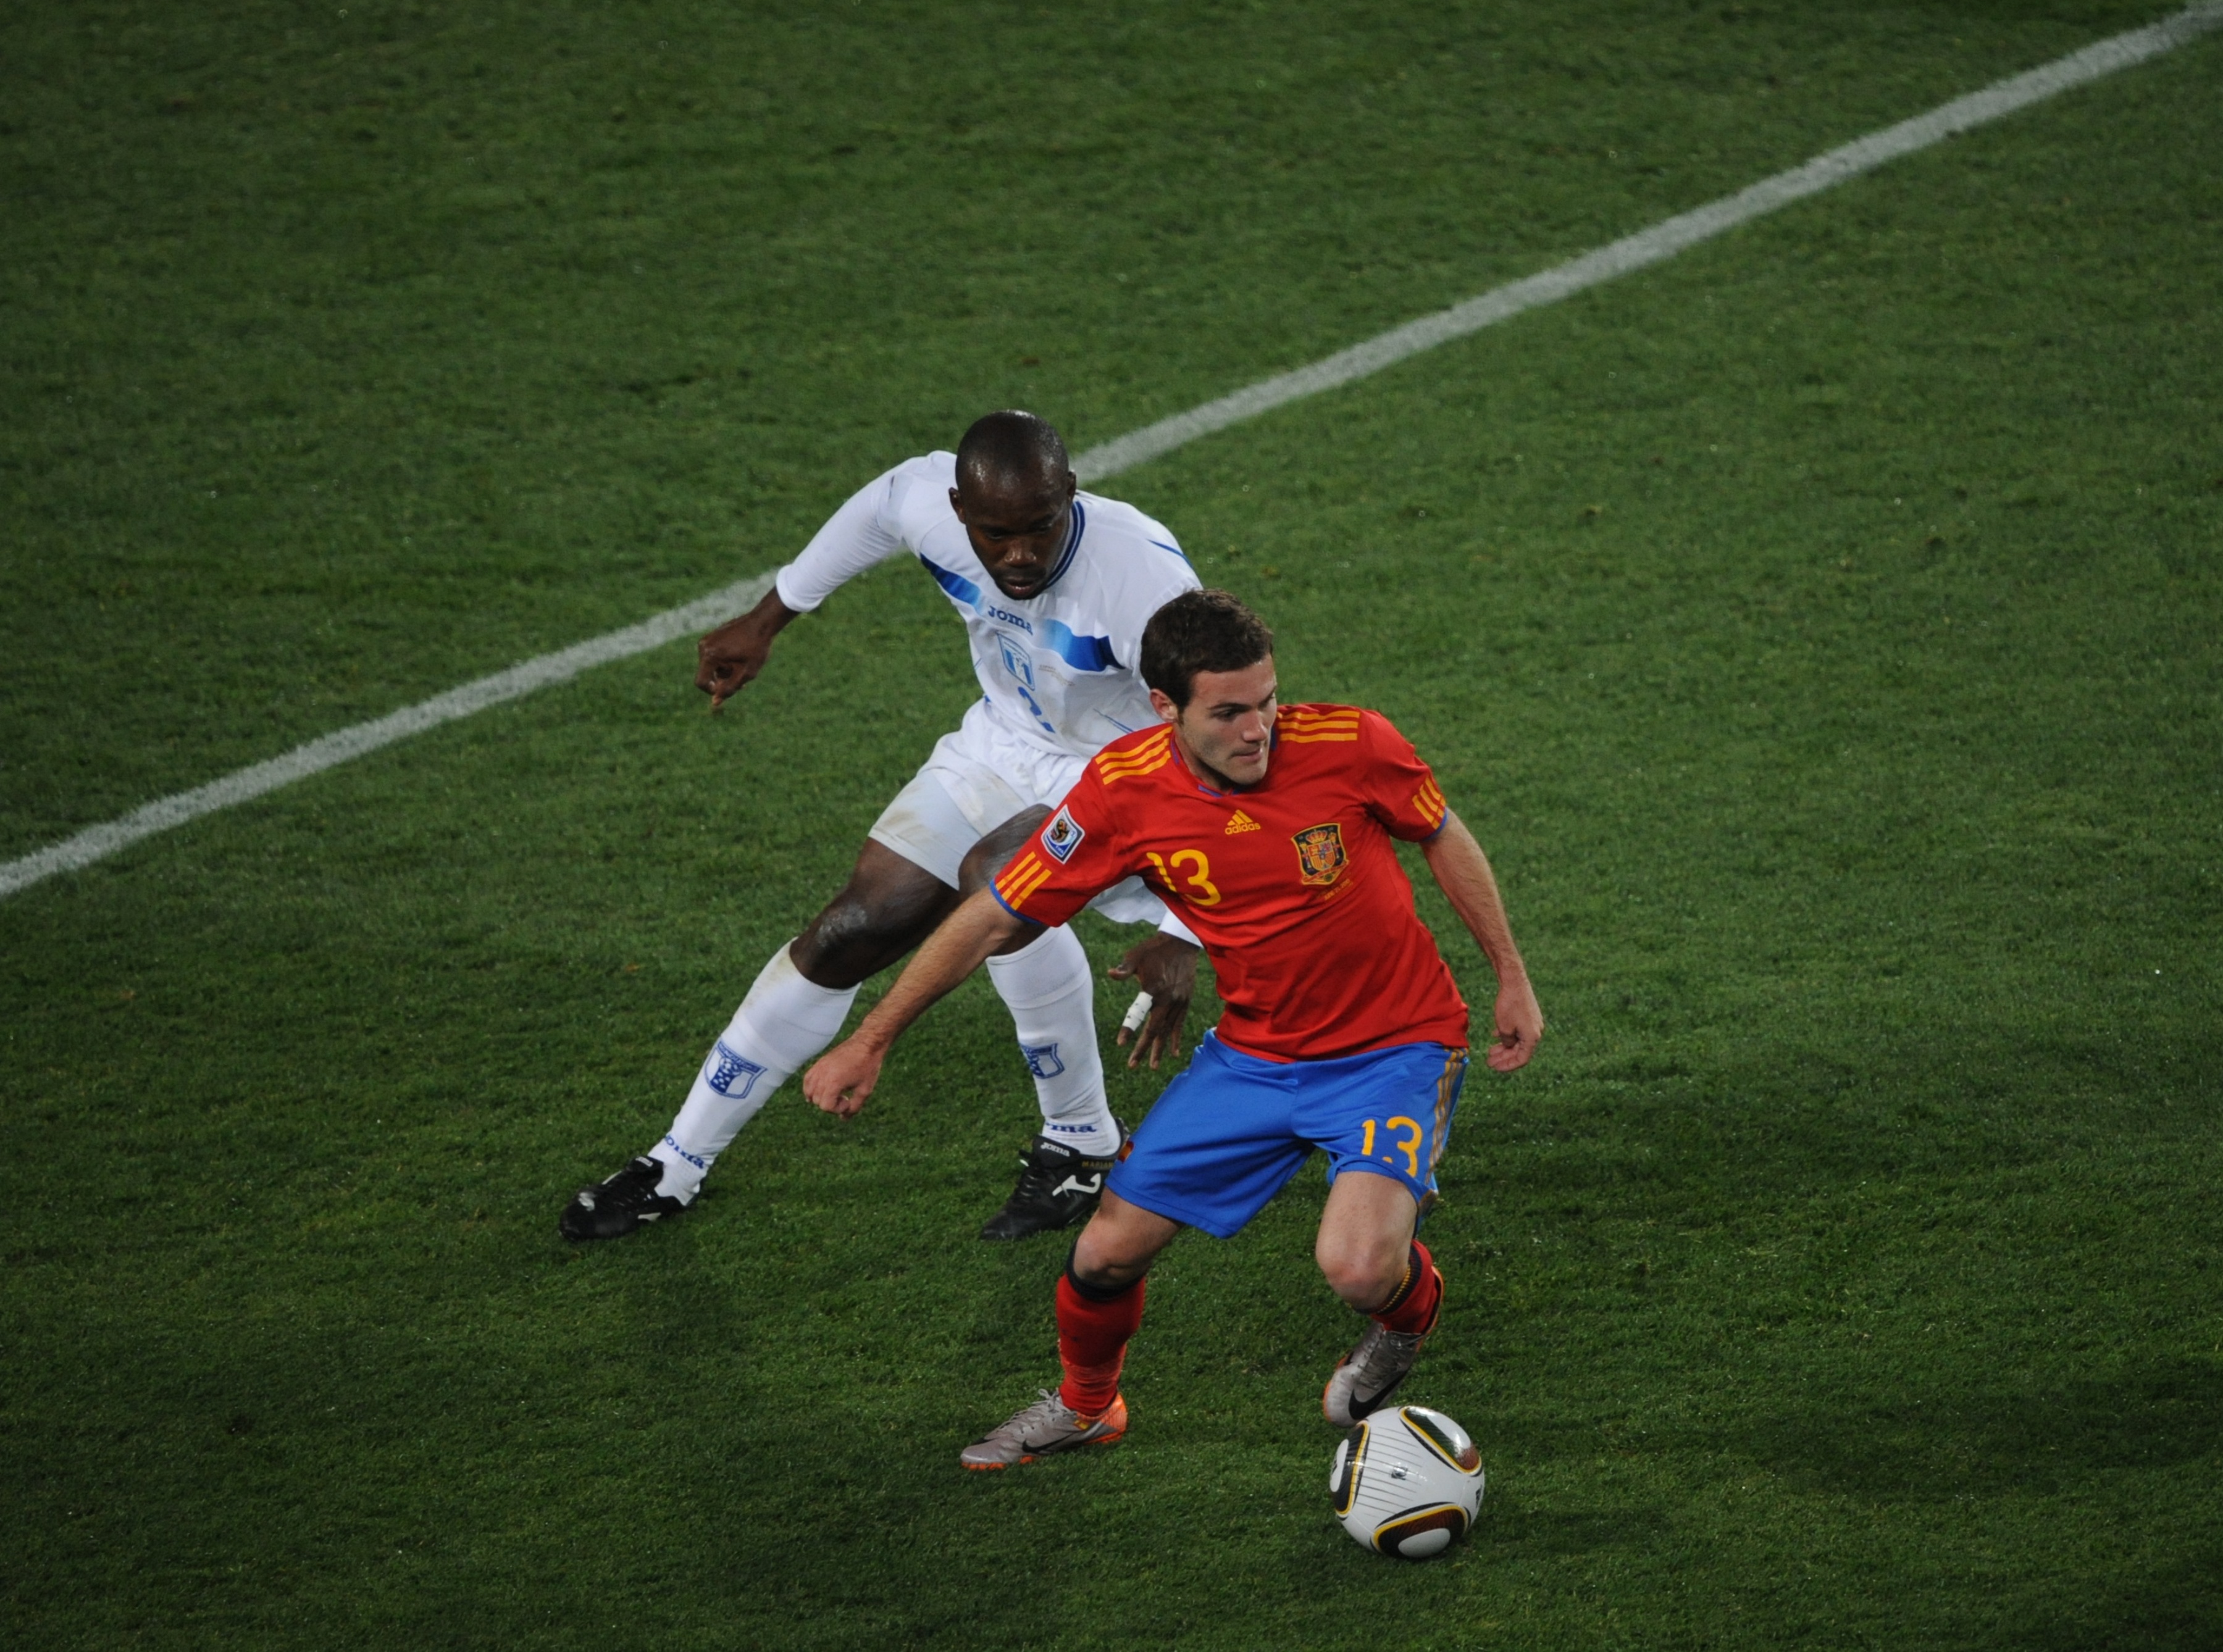 Juan Mata in action for Spain against Honduras at the 2010 World Cup.